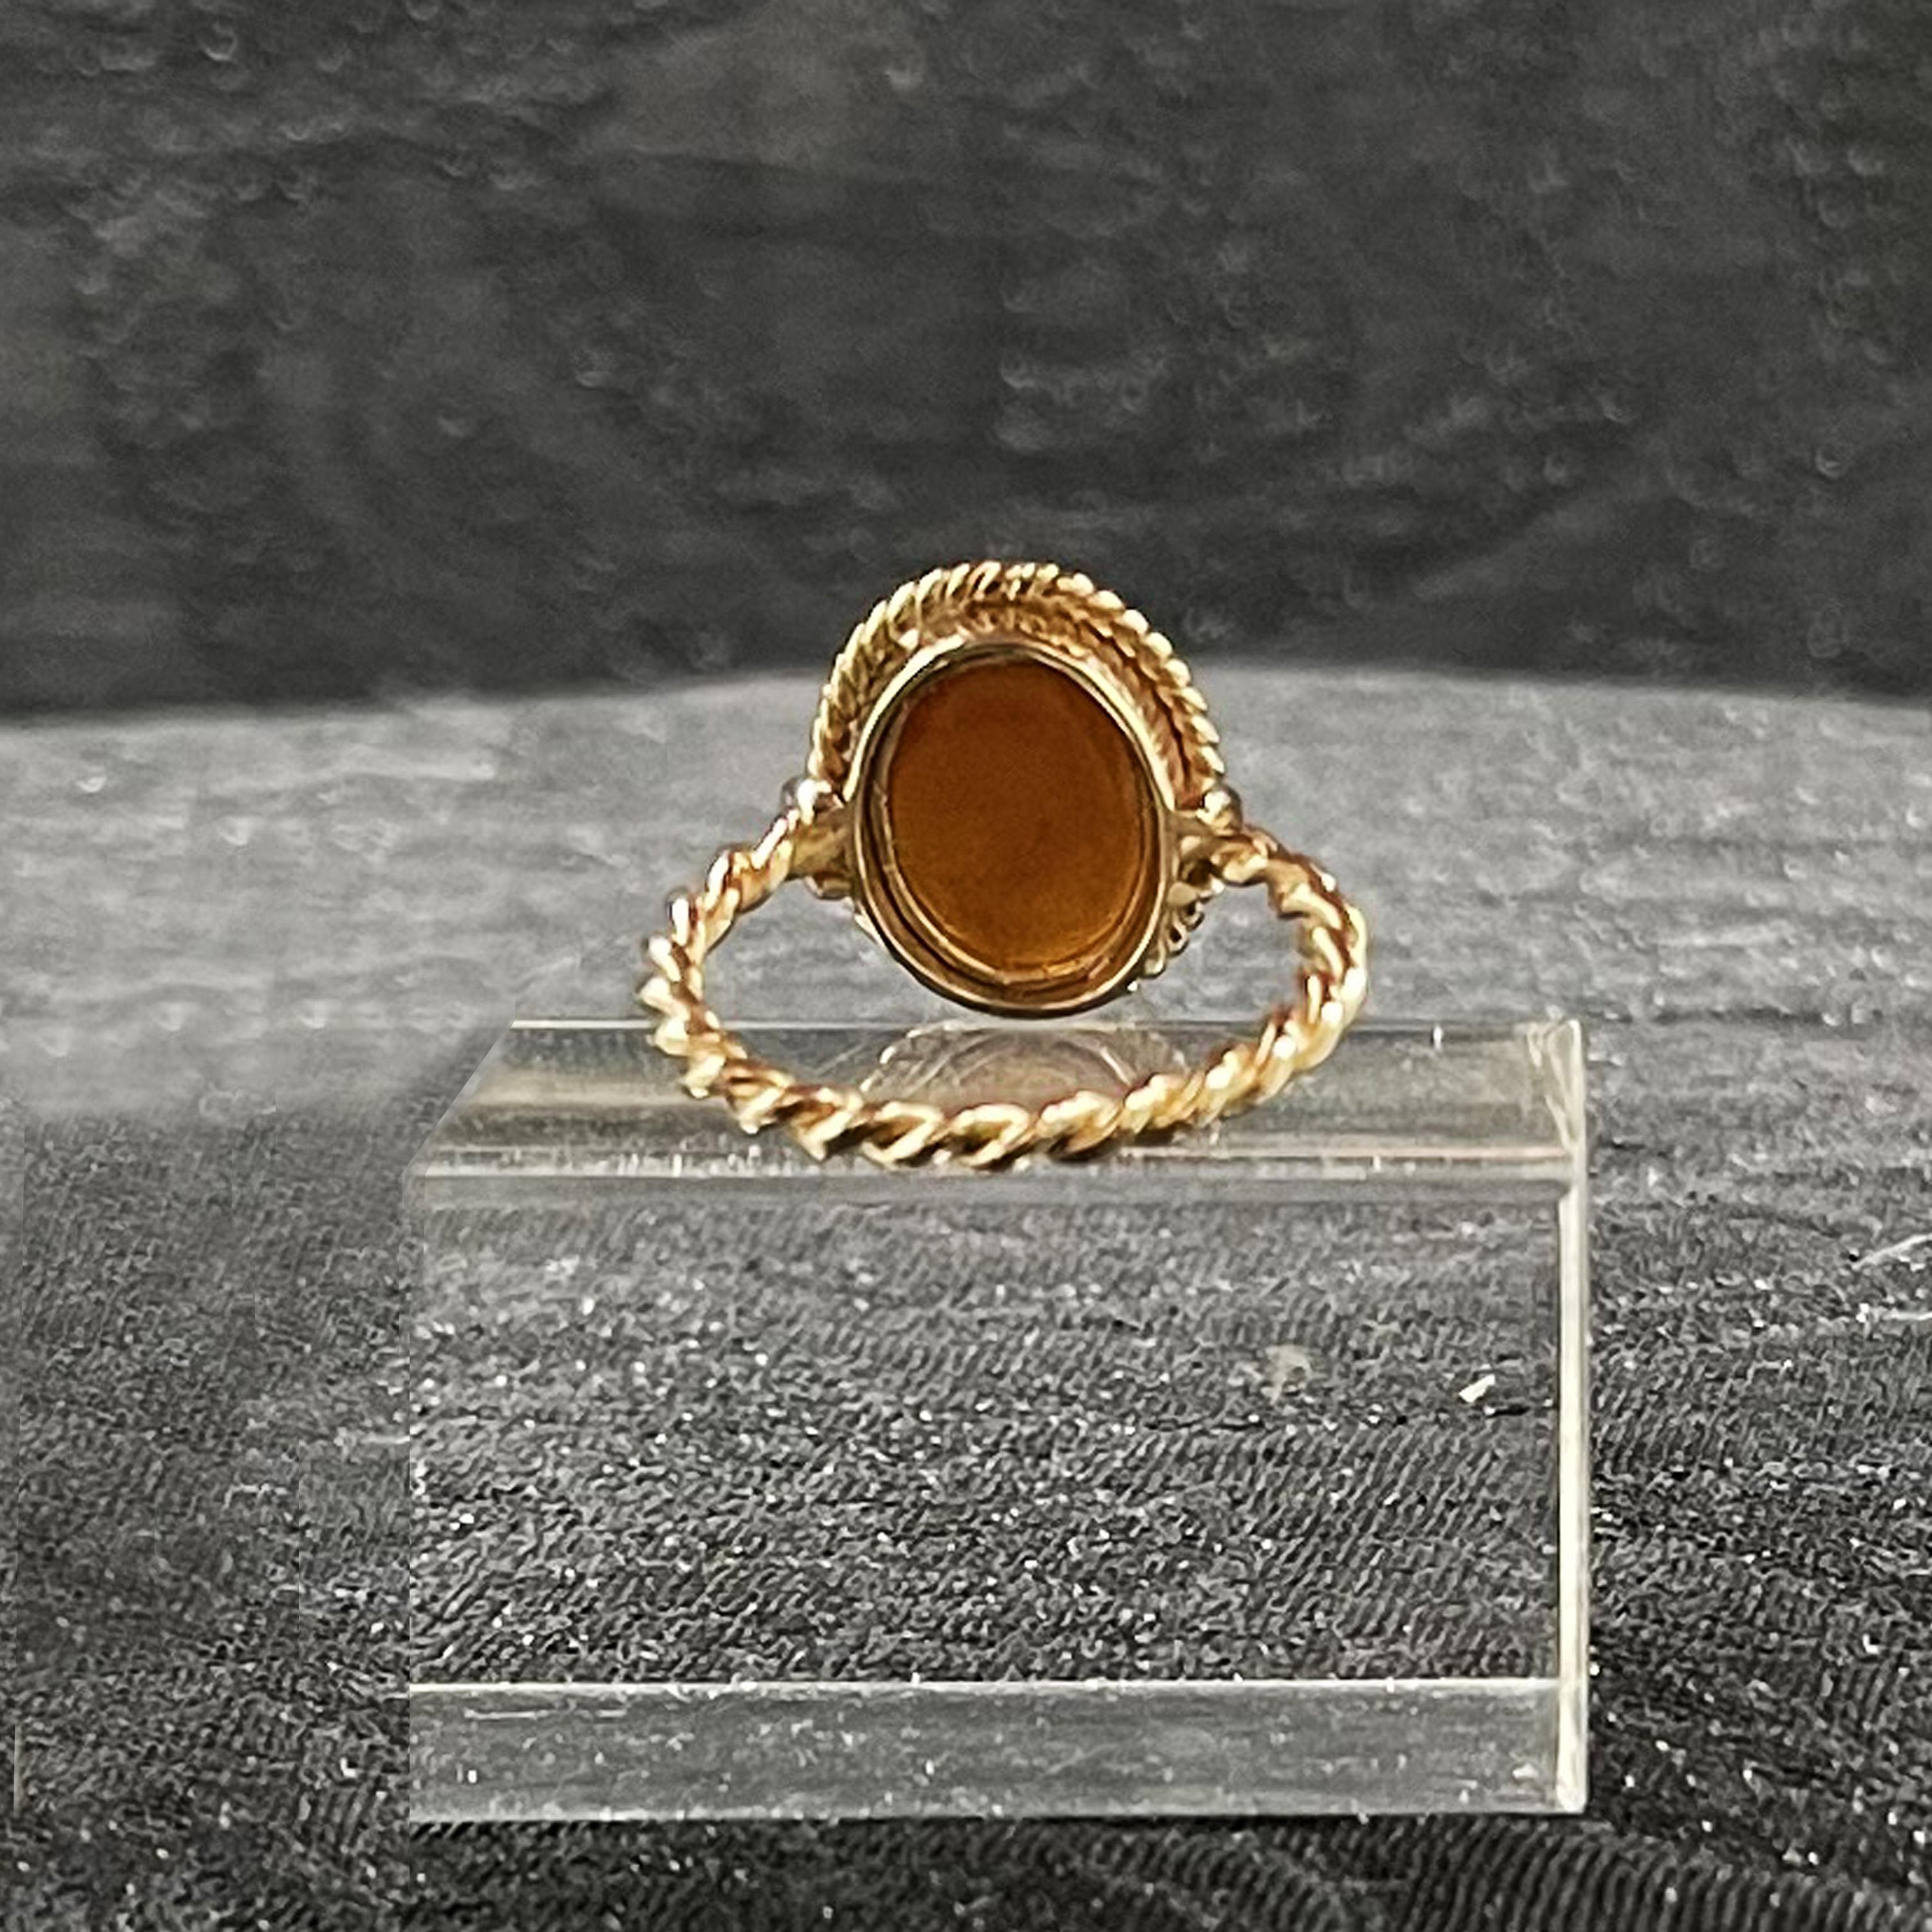 Oval Cut Roman Intaglio 2nd Cent. AD Depicting the Moon and Seven Stars 18 Kt Gold Ring